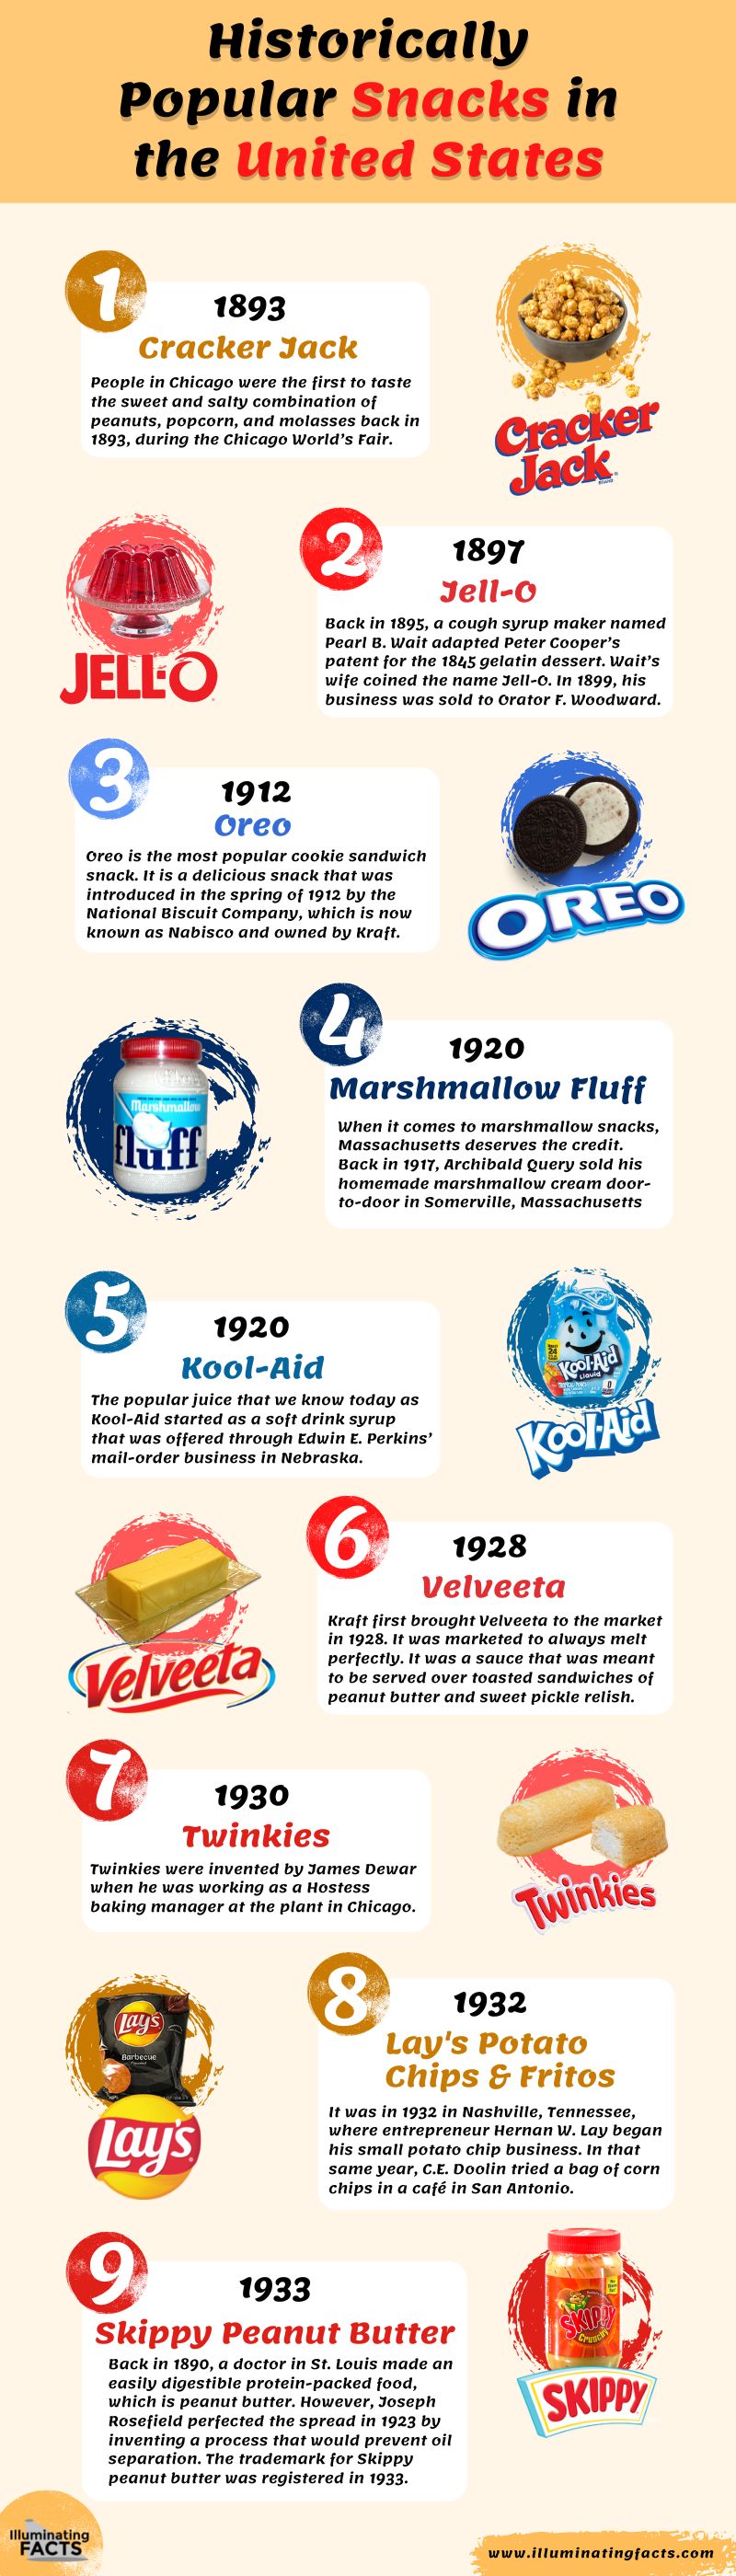 Historically Popular Snacks in the United States